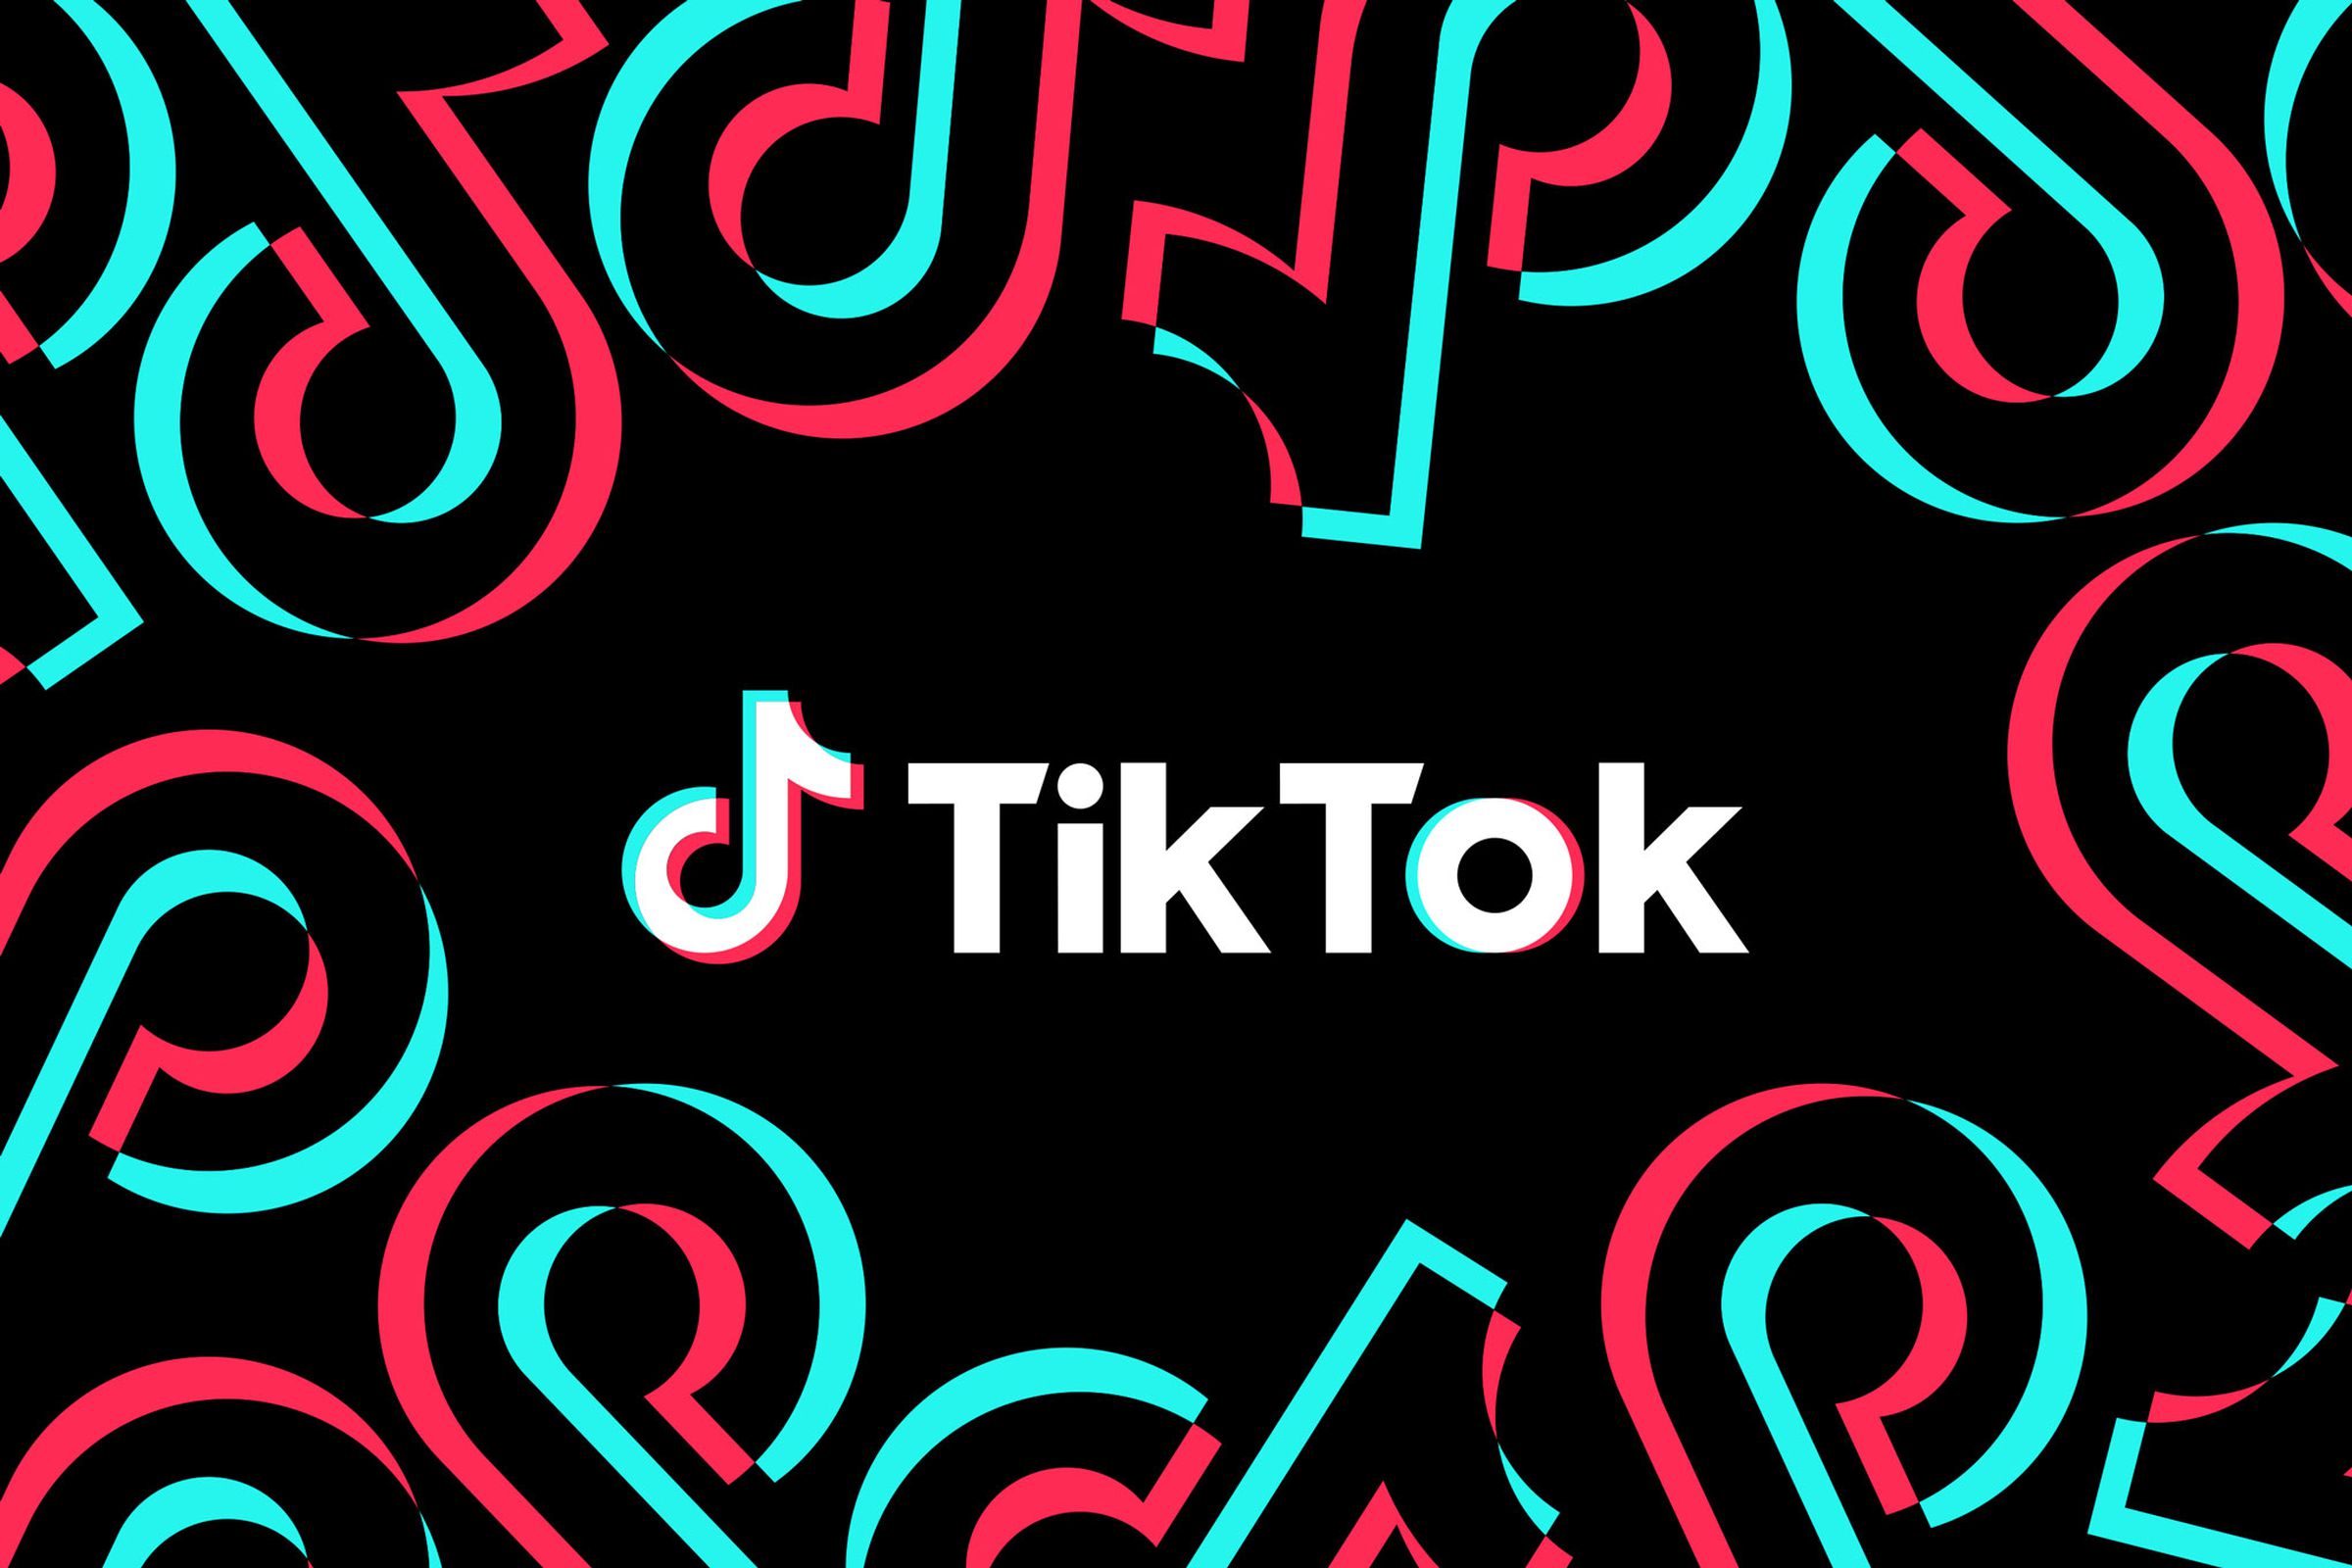 The TikTok logo on a black background with pink and blue repeating logos around the edges.